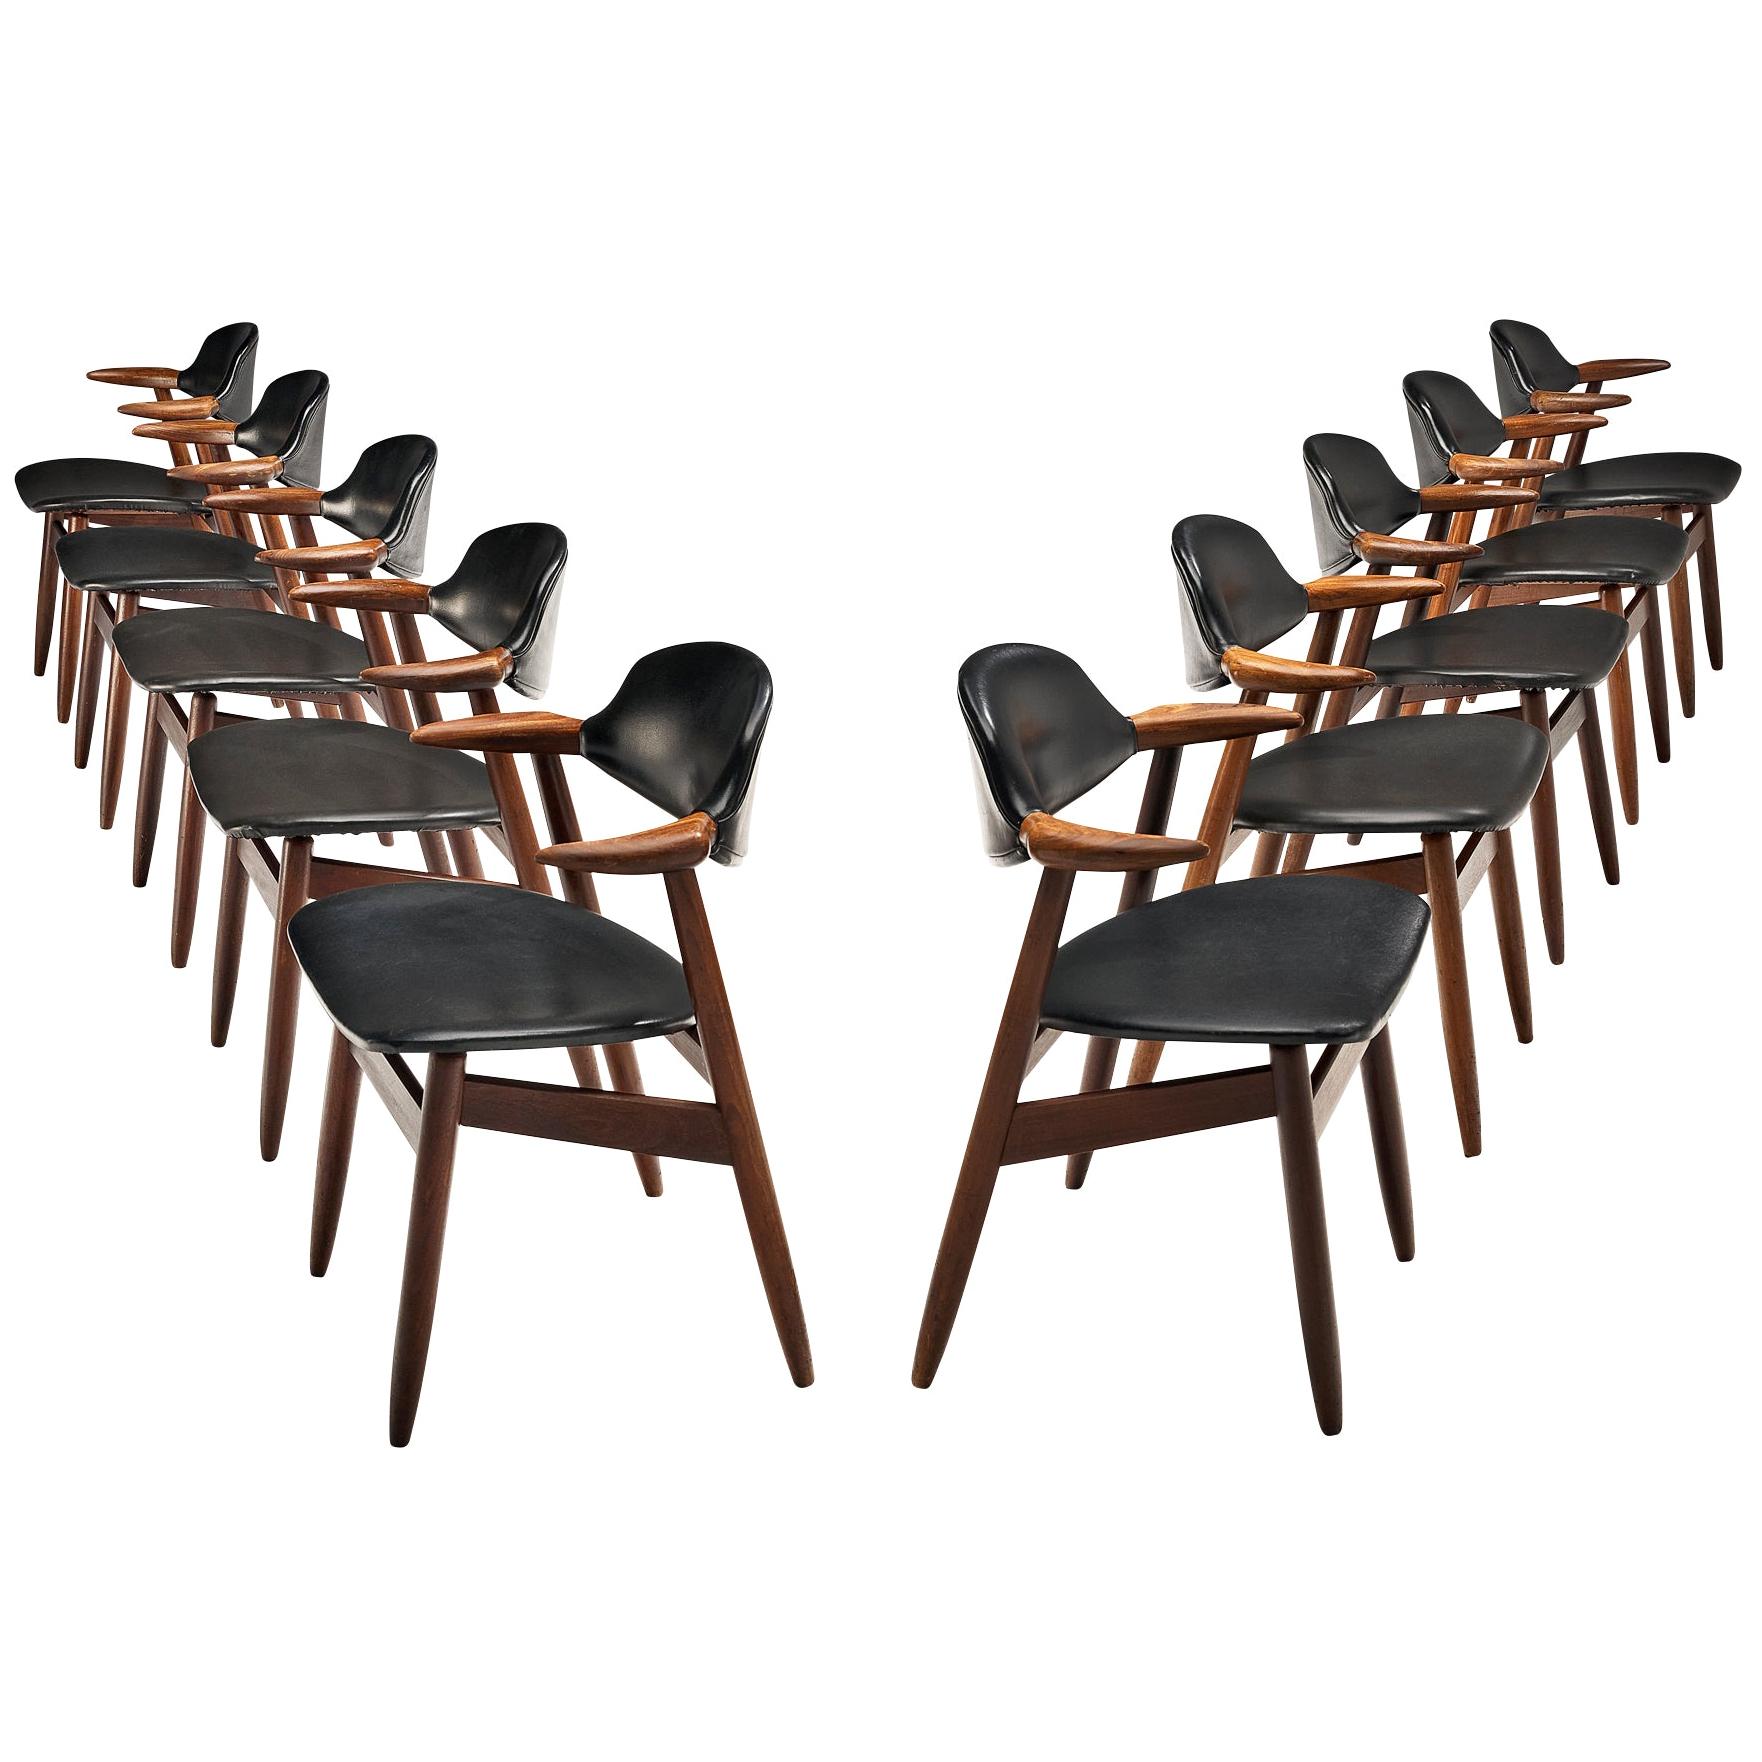 Set of 10 ‘Bullhorn’ Dining Chairs in Teak and Faux Leather